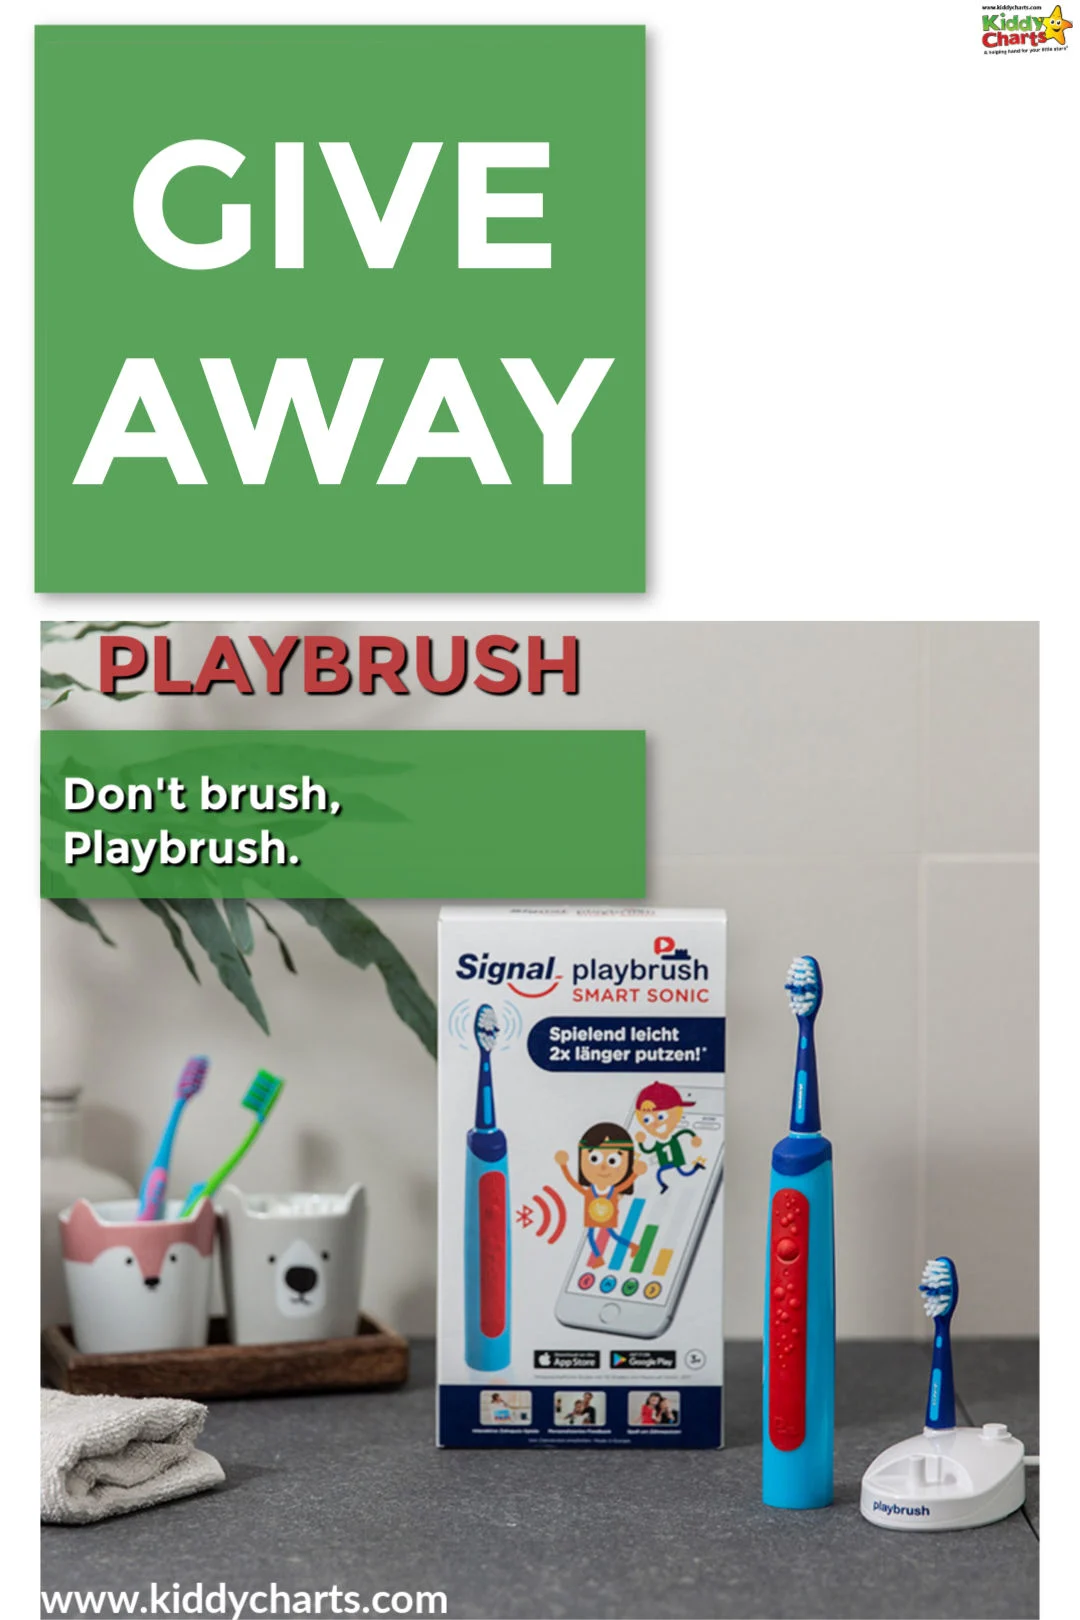 Pop over and enter our giveaway for a Playbrush; make life easier at teeth cleaning time! Closes 30th Nov, 2018. #teeth #kids